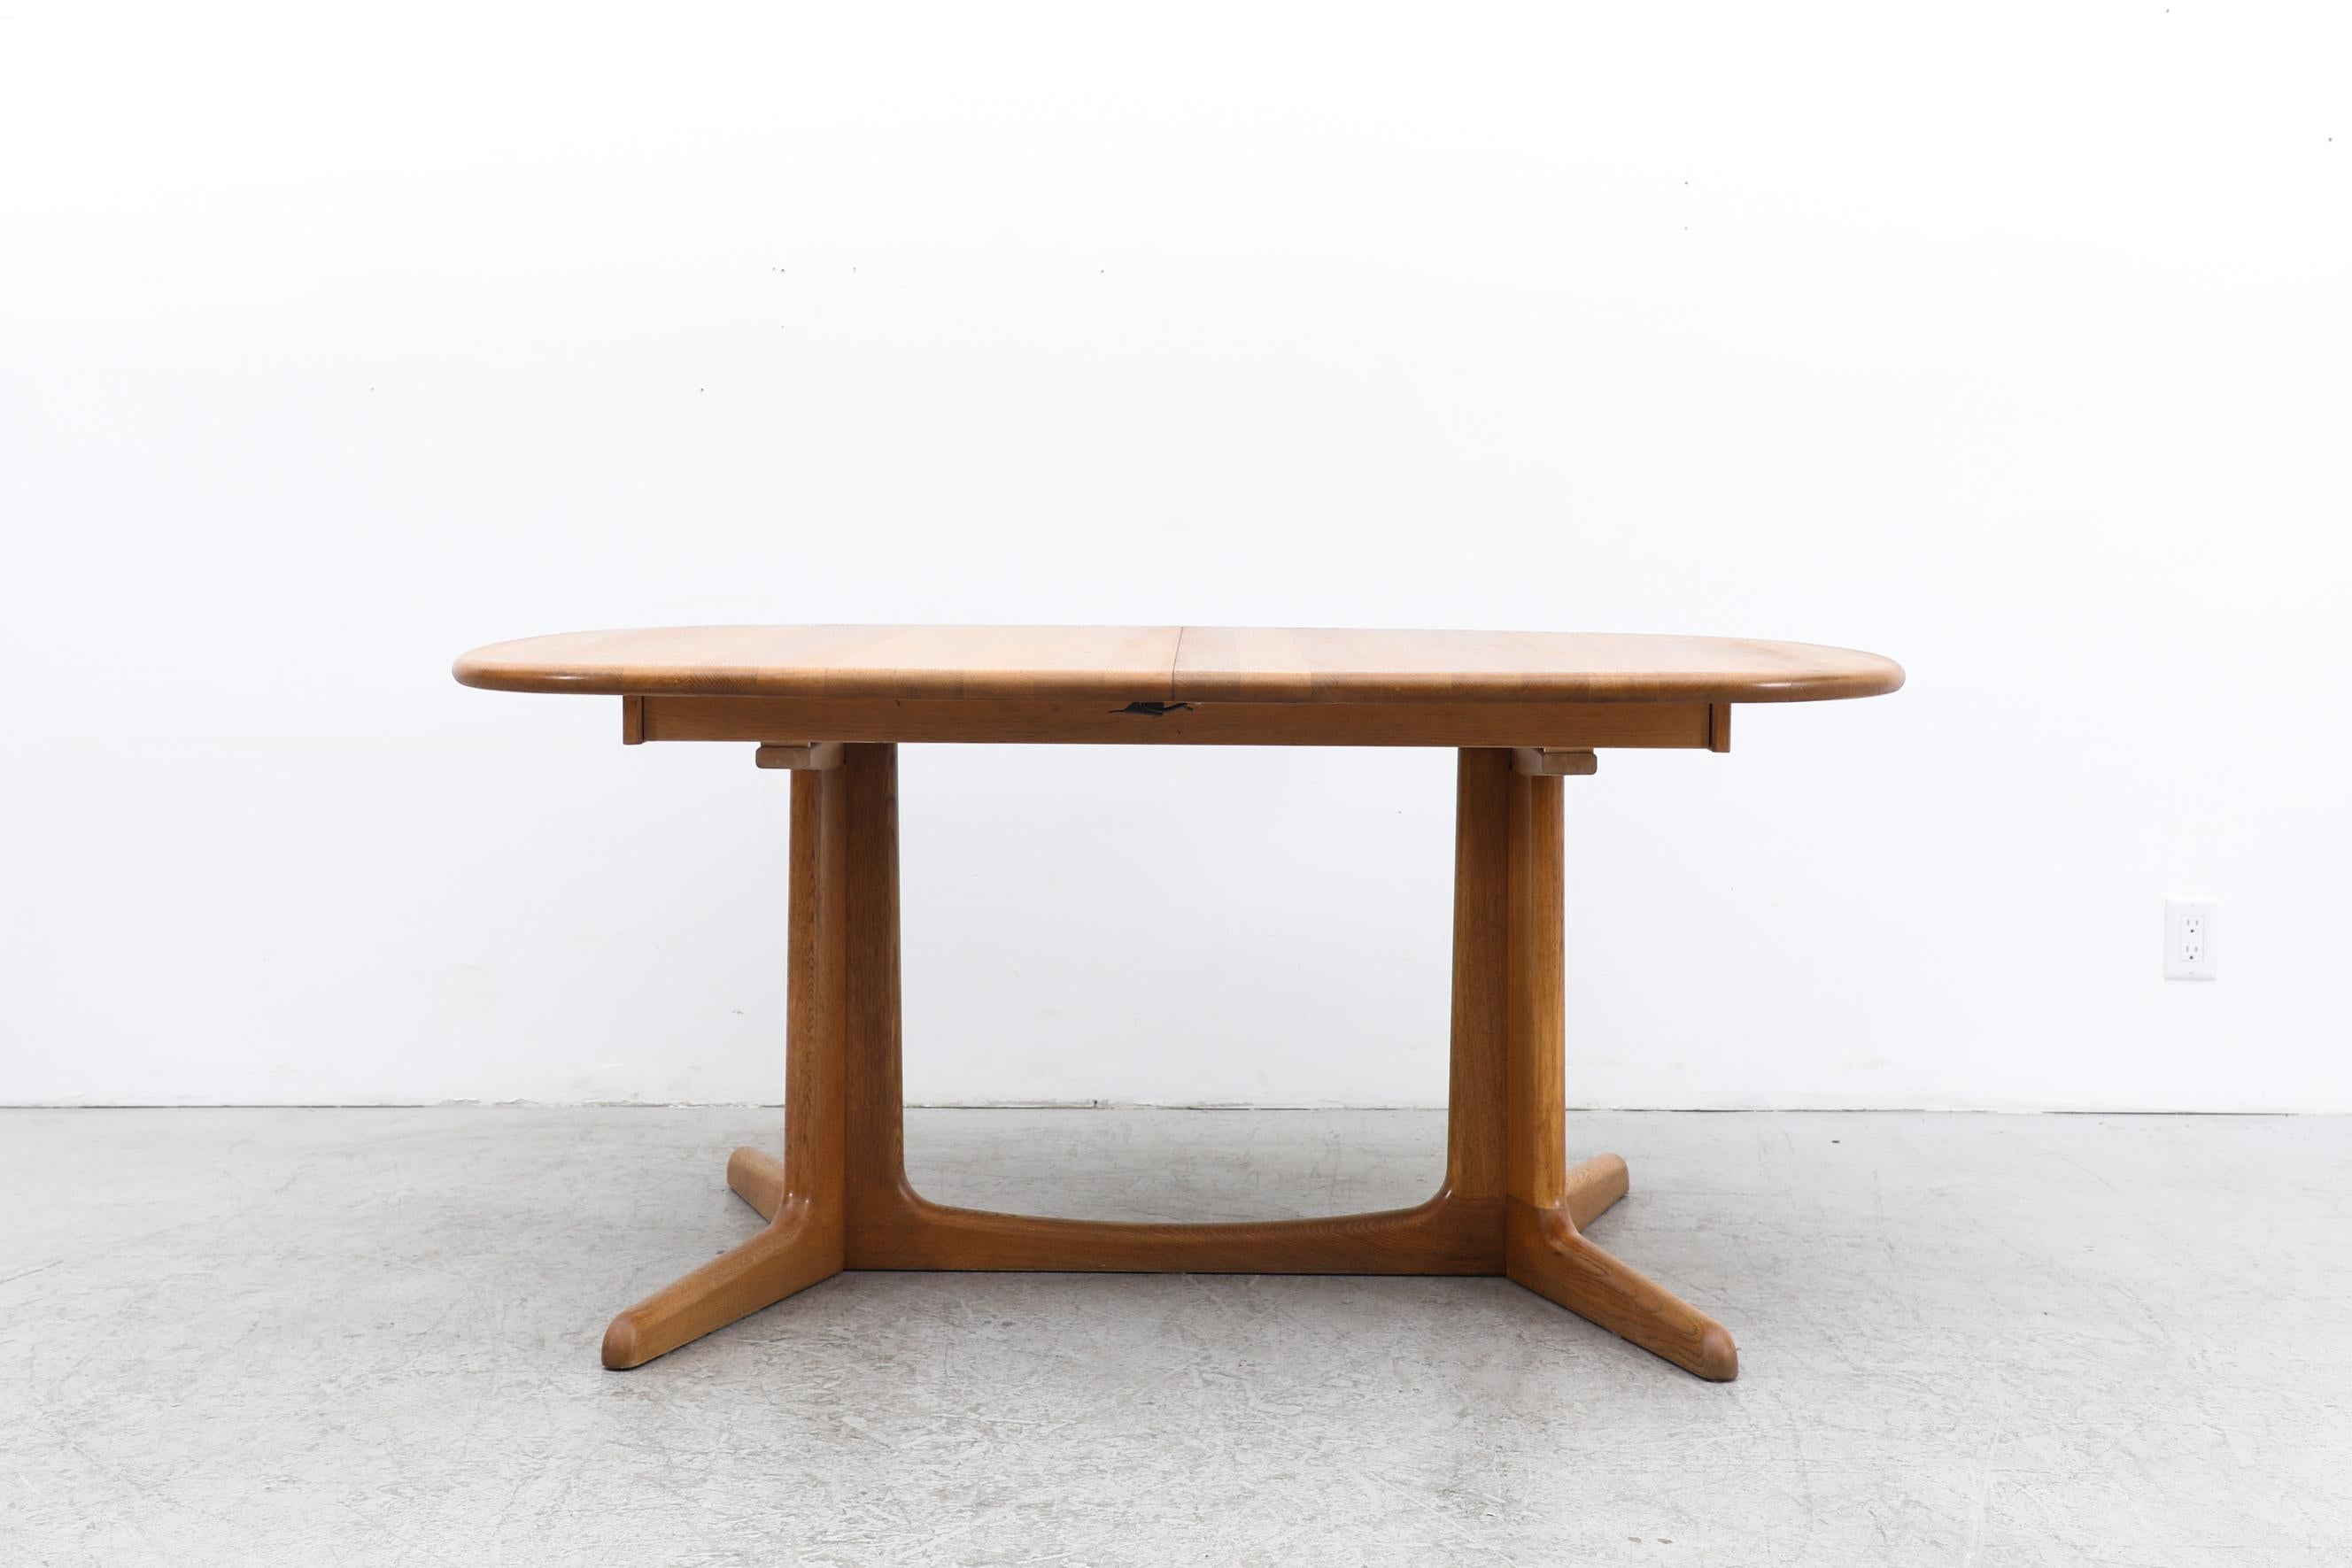 Oak dining table with a smooth rounded pedestal base and an extension leaf for Gudme Mobelfabrik, Denmark 1960's. With the leaf, it can fit up to 10 people and measures 102